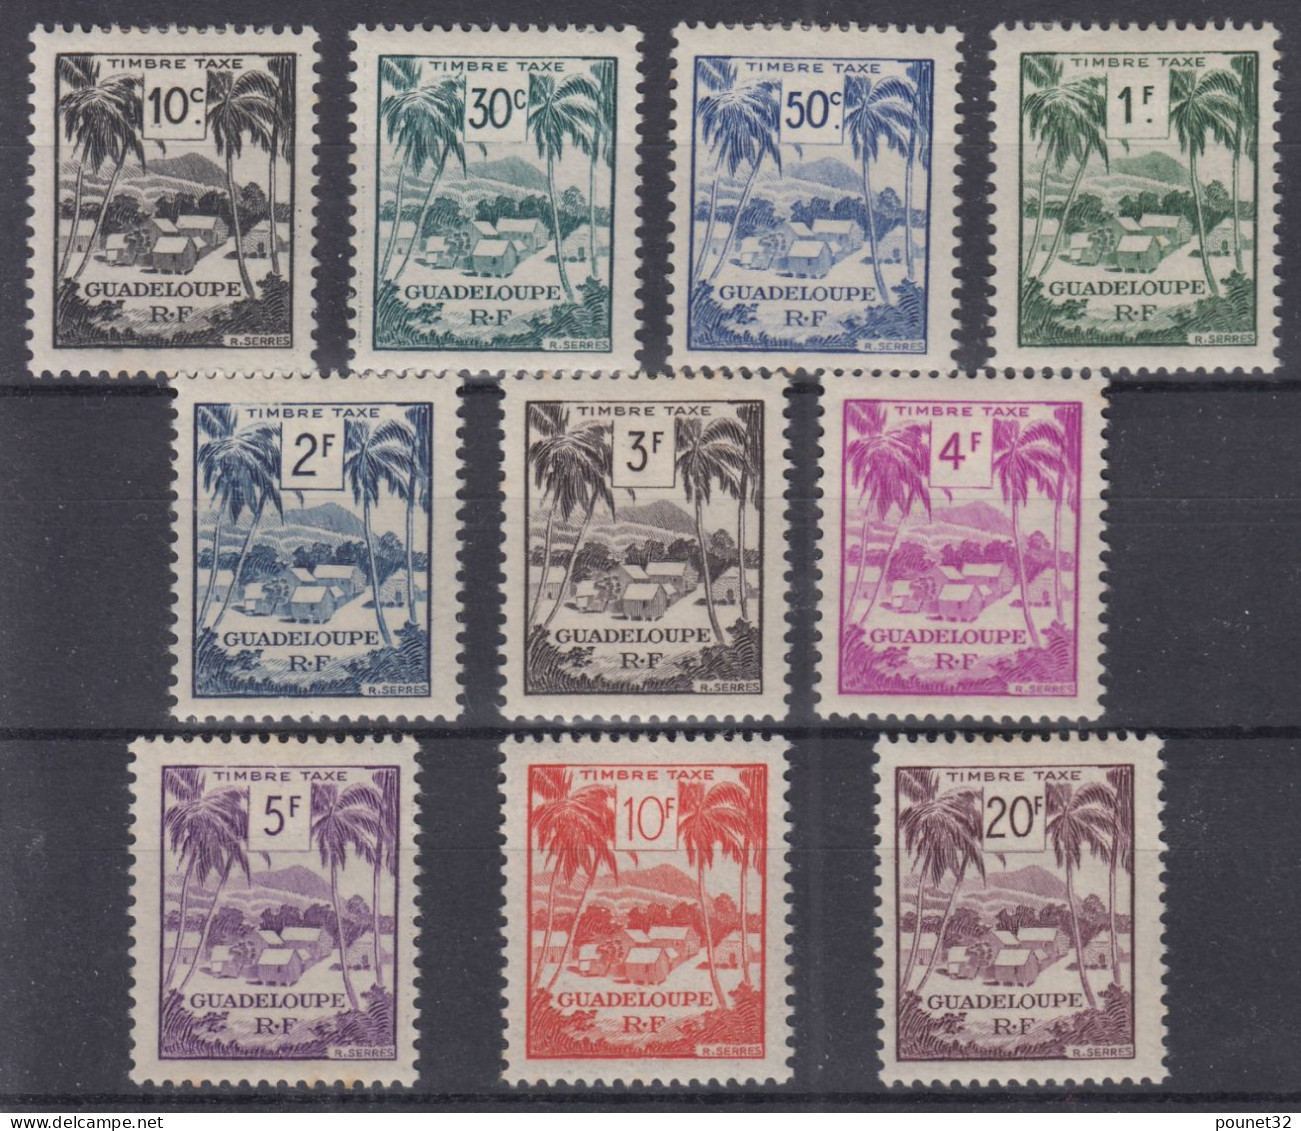 GUADELOUPE 1947 SERIE TAXE N° 41/50 NEUFS * GOMME AVEC CHARNIERE - Strafport